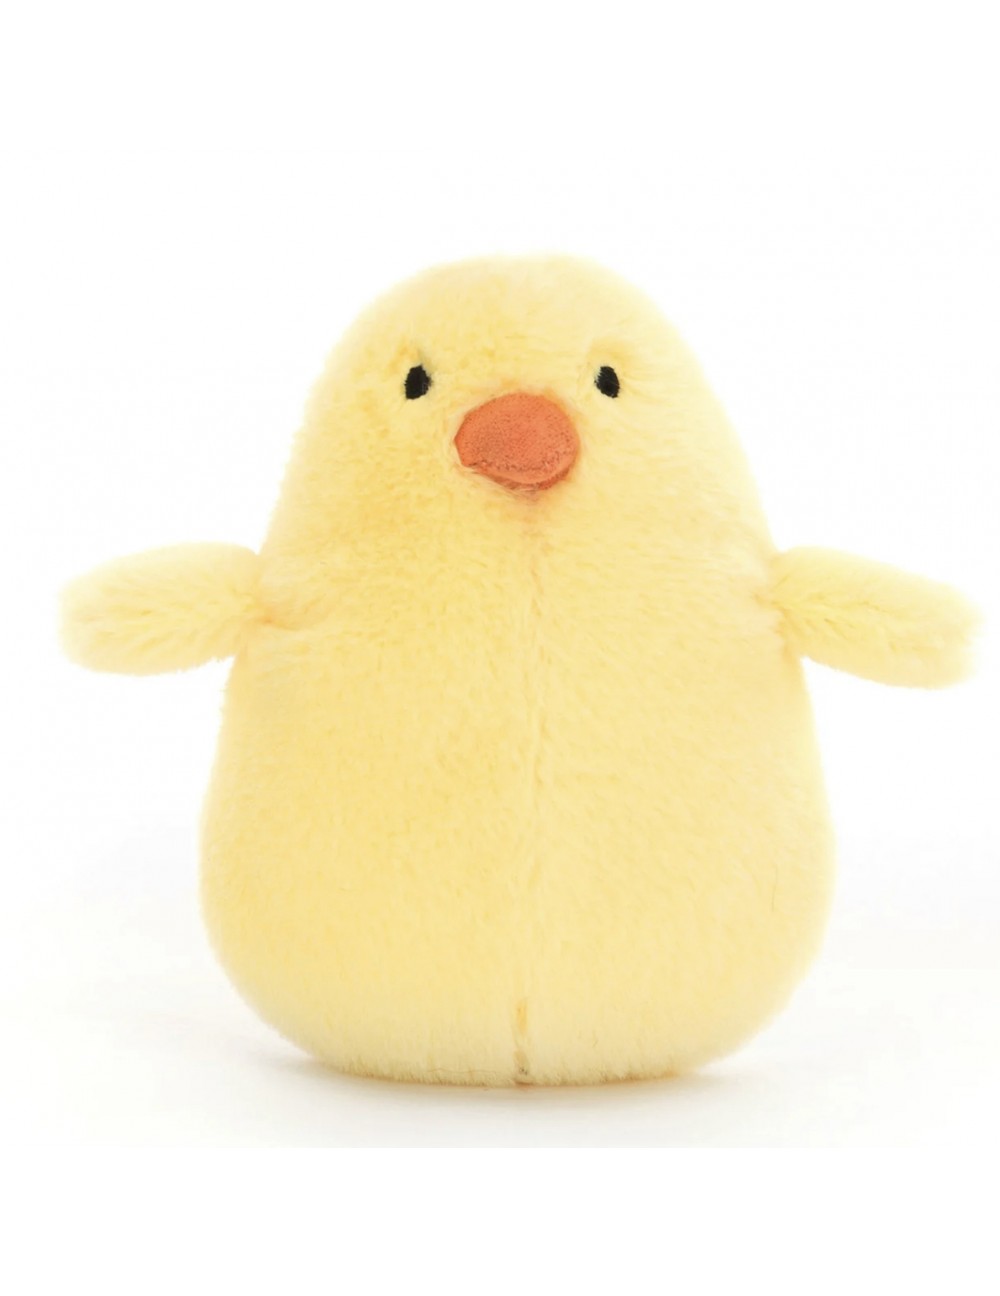 Peluche mini poussin Chicky